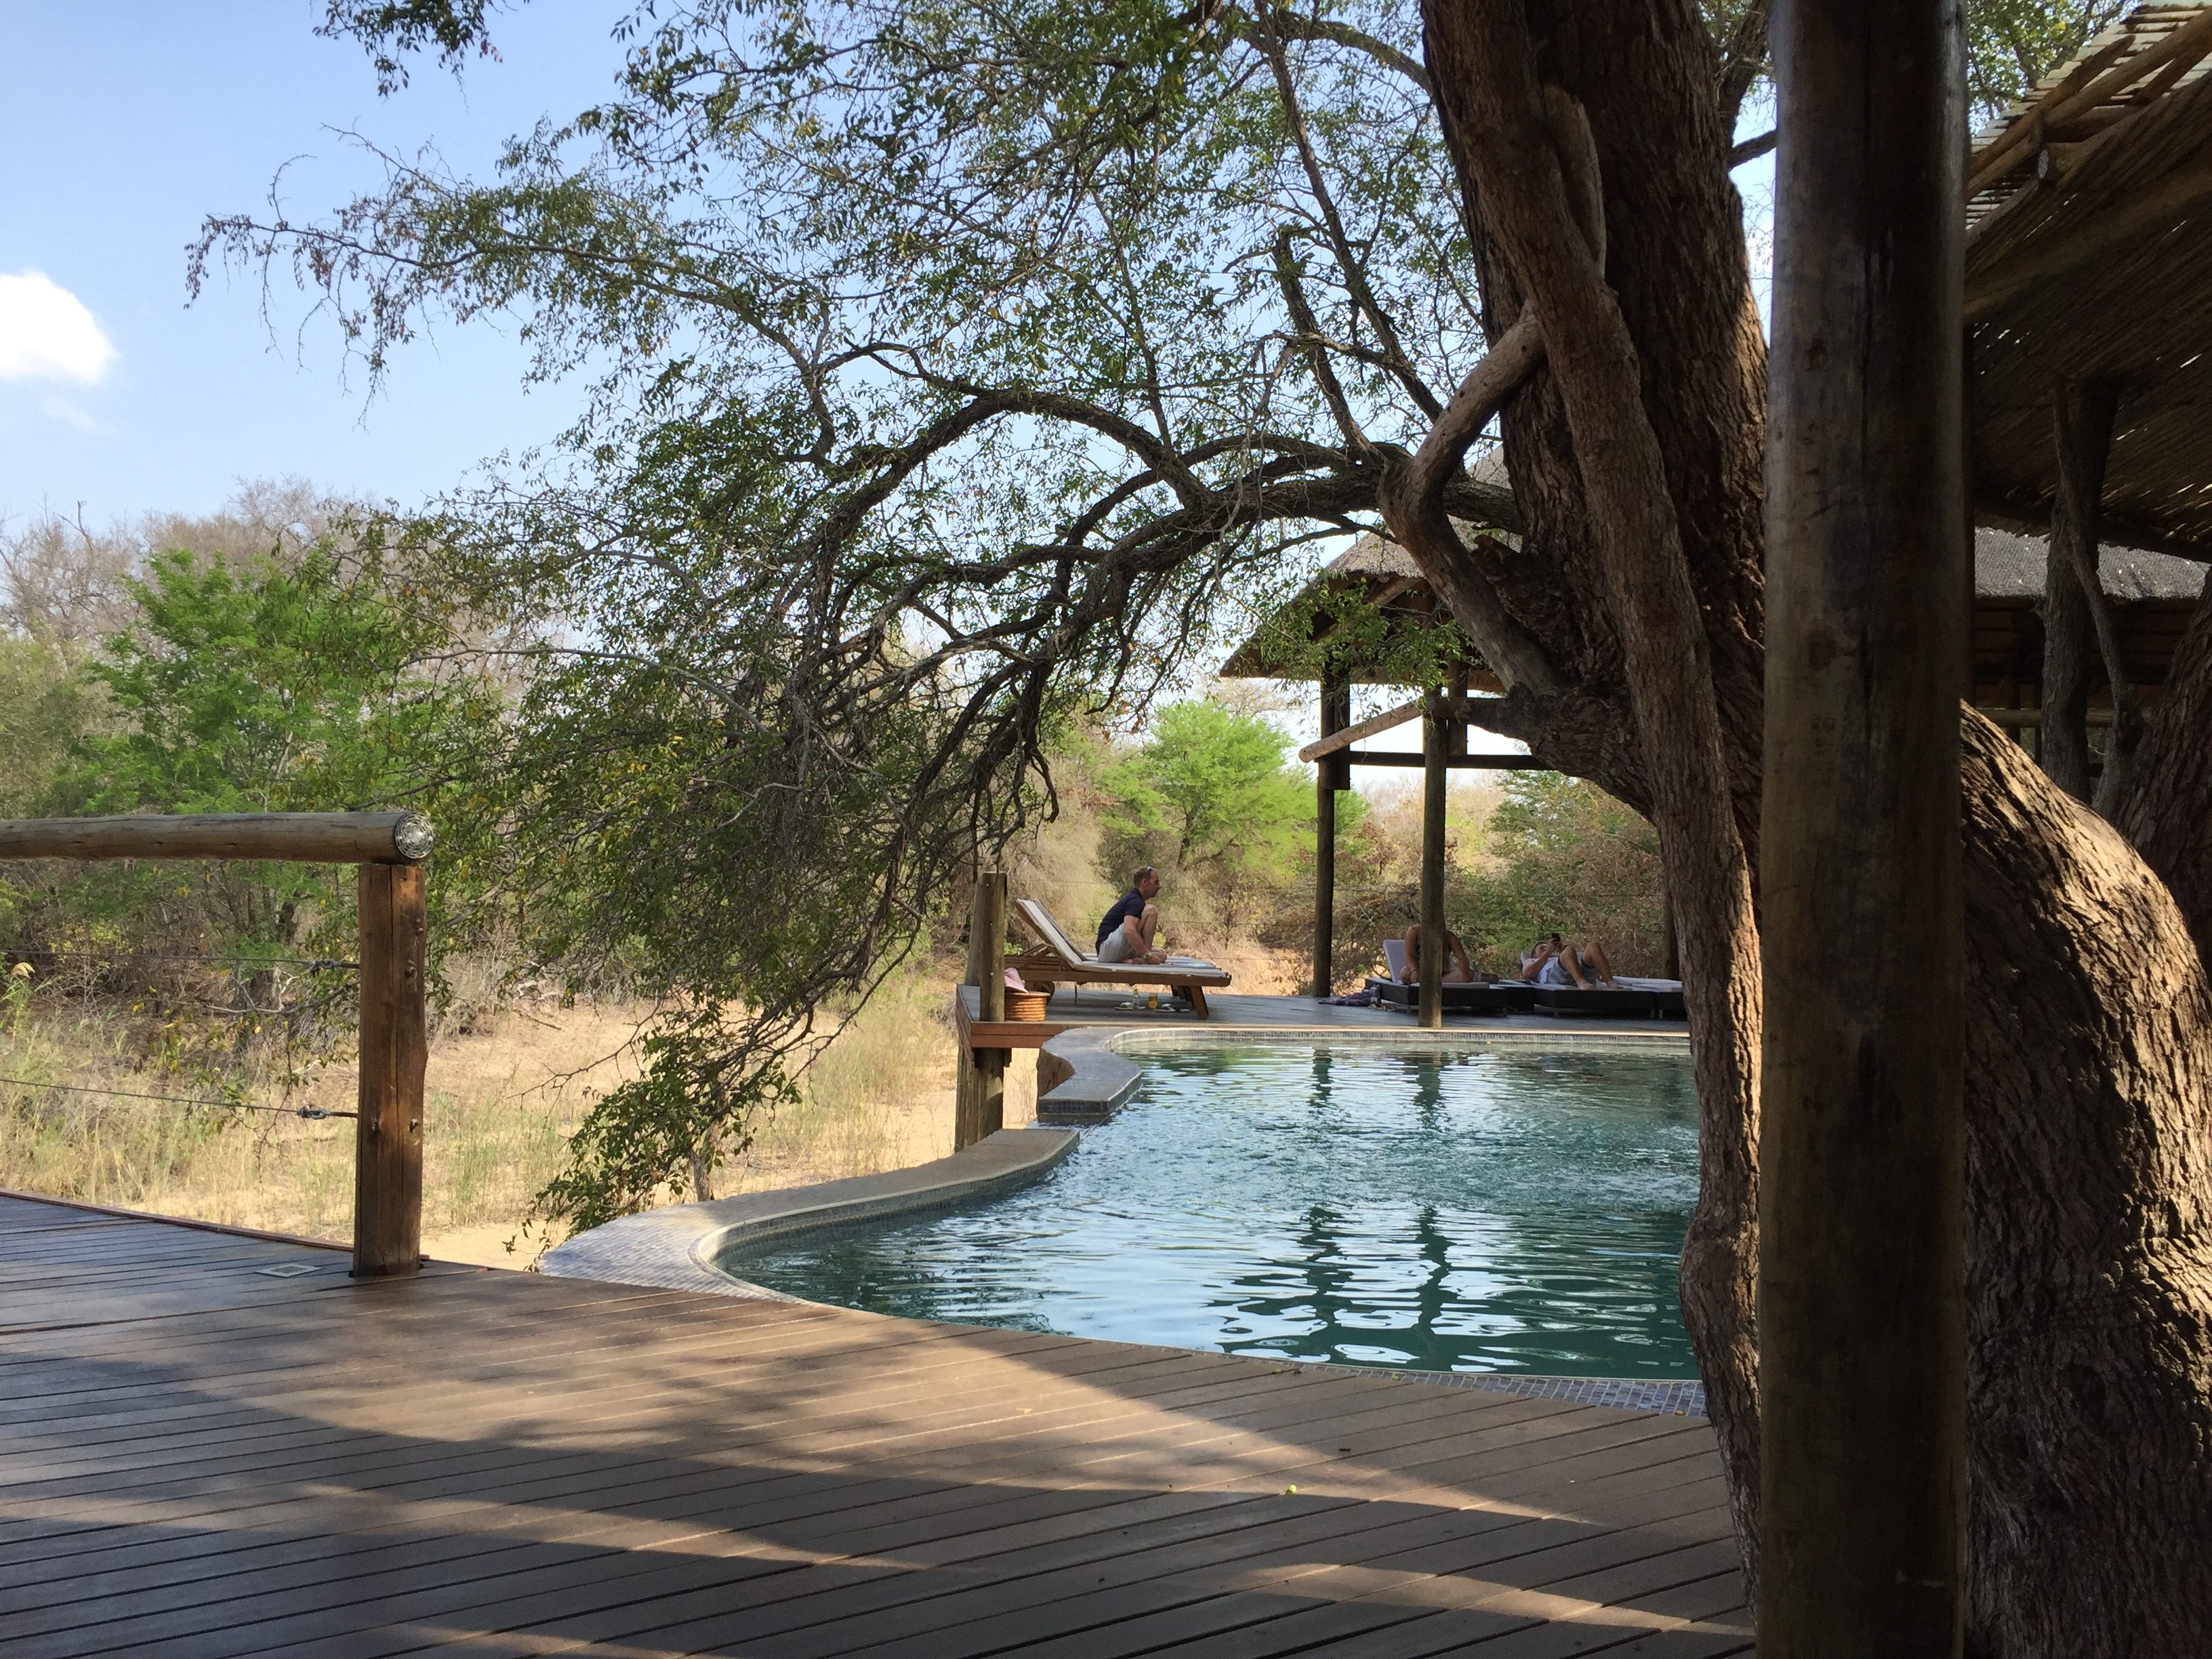 Spend your days between game drives lounging by the pool at the Moditlo River Lodge in Hoedspruit, South Africa outside of Kruger National Park.